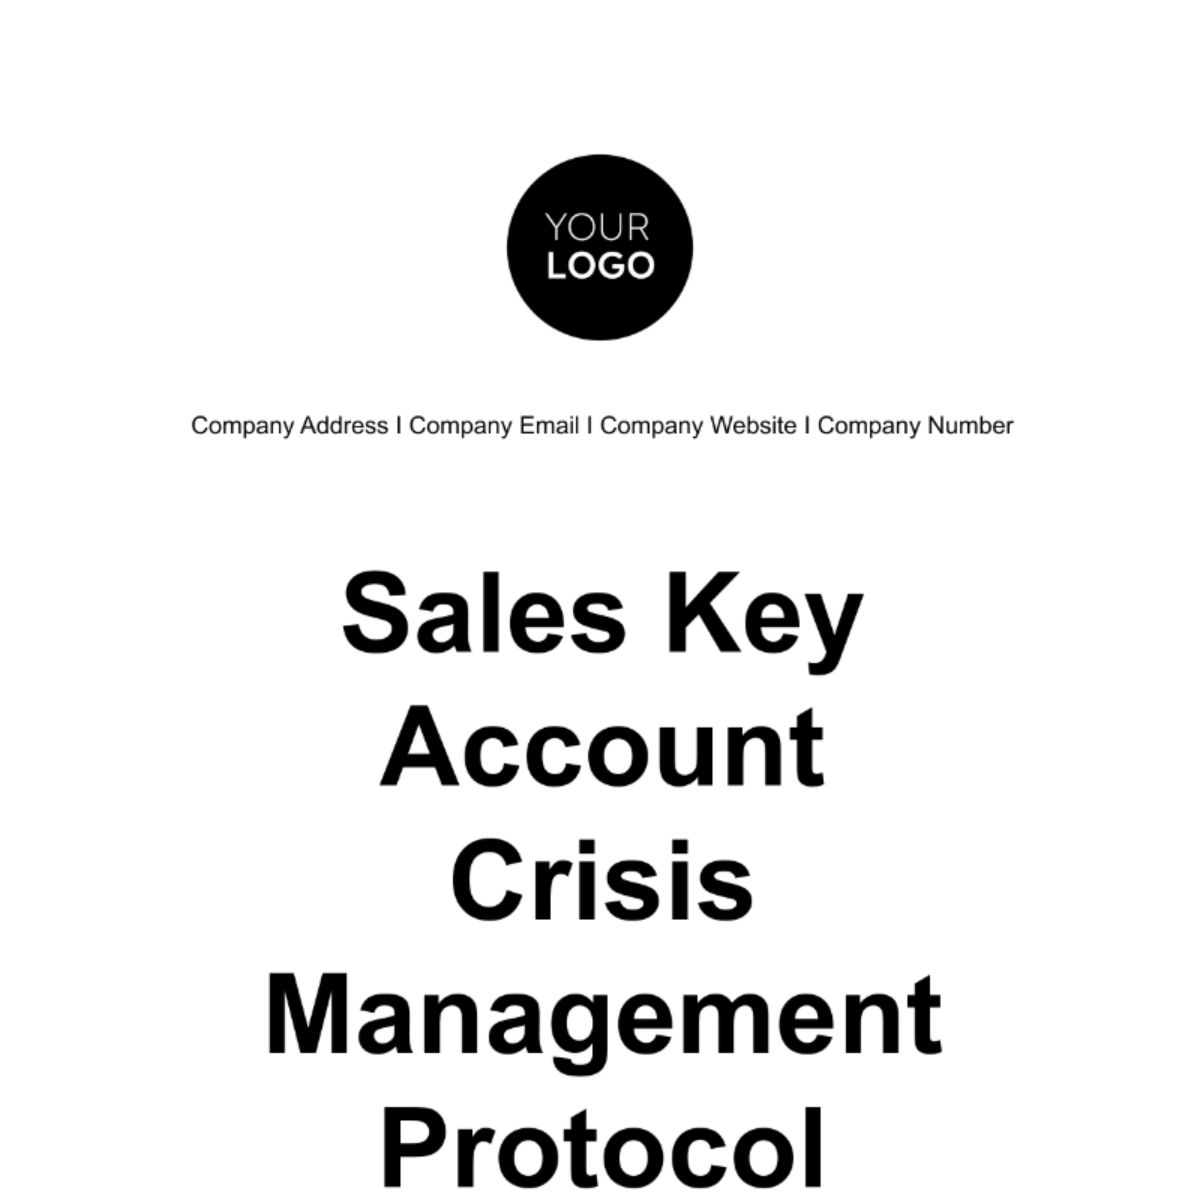 Free Sales Key Account Crisis Management Protocol Template